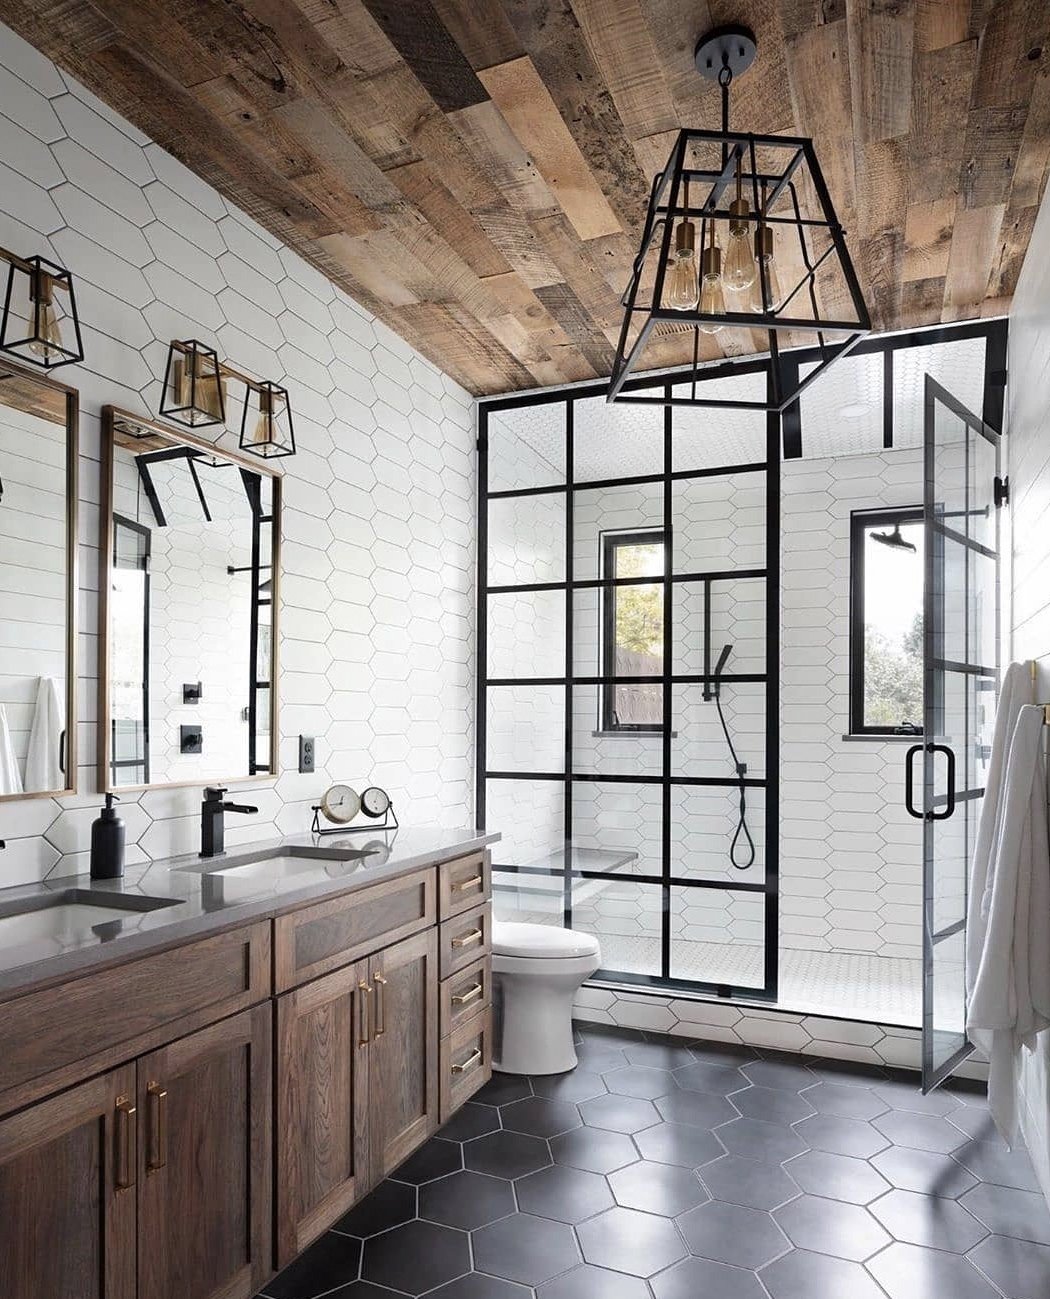 Super Cool Bathroom Designs Make You Want To Spend The Day There 123 Design Blog,Grey And White Bathroom Tile Designs